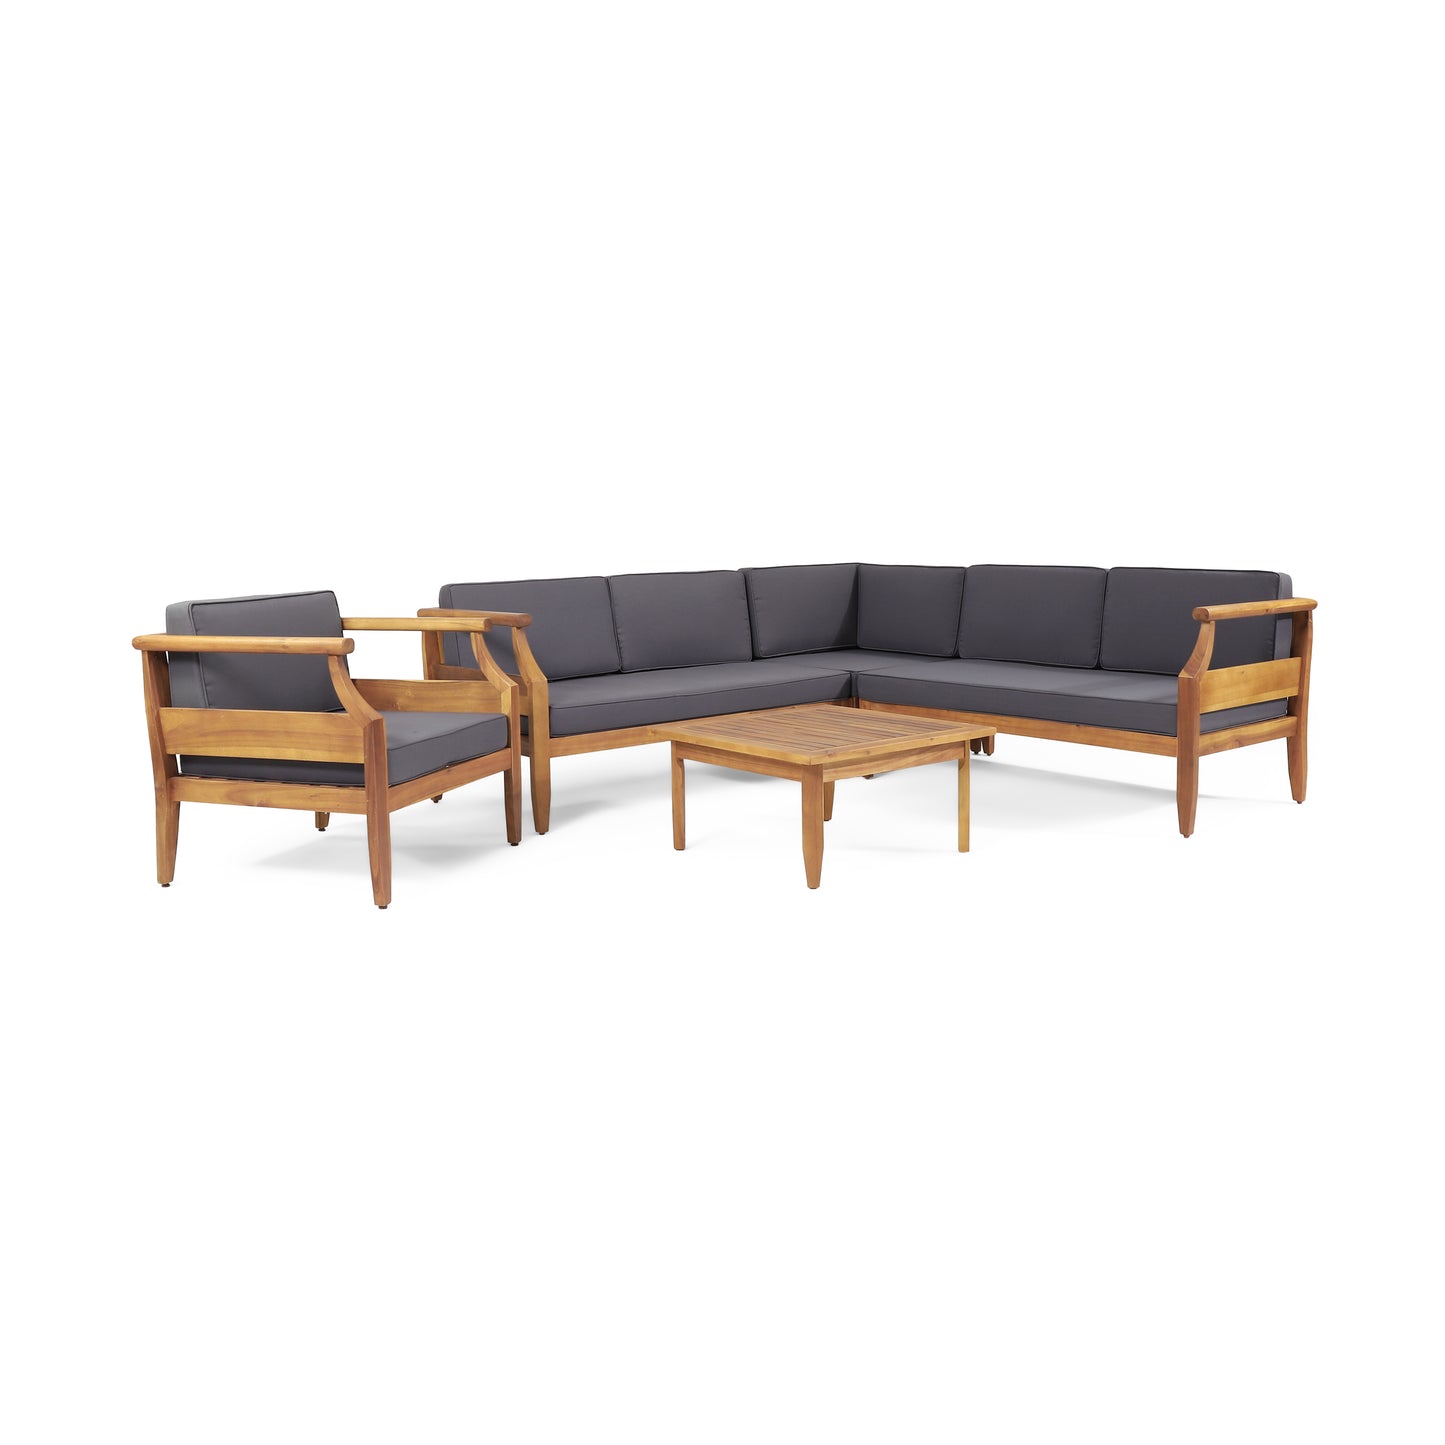 Bianca Outdoor Mid-Century Modern Acacia Wood 5 Seater Sectional Chat Set with Club Chair, Teak and Dark Gray